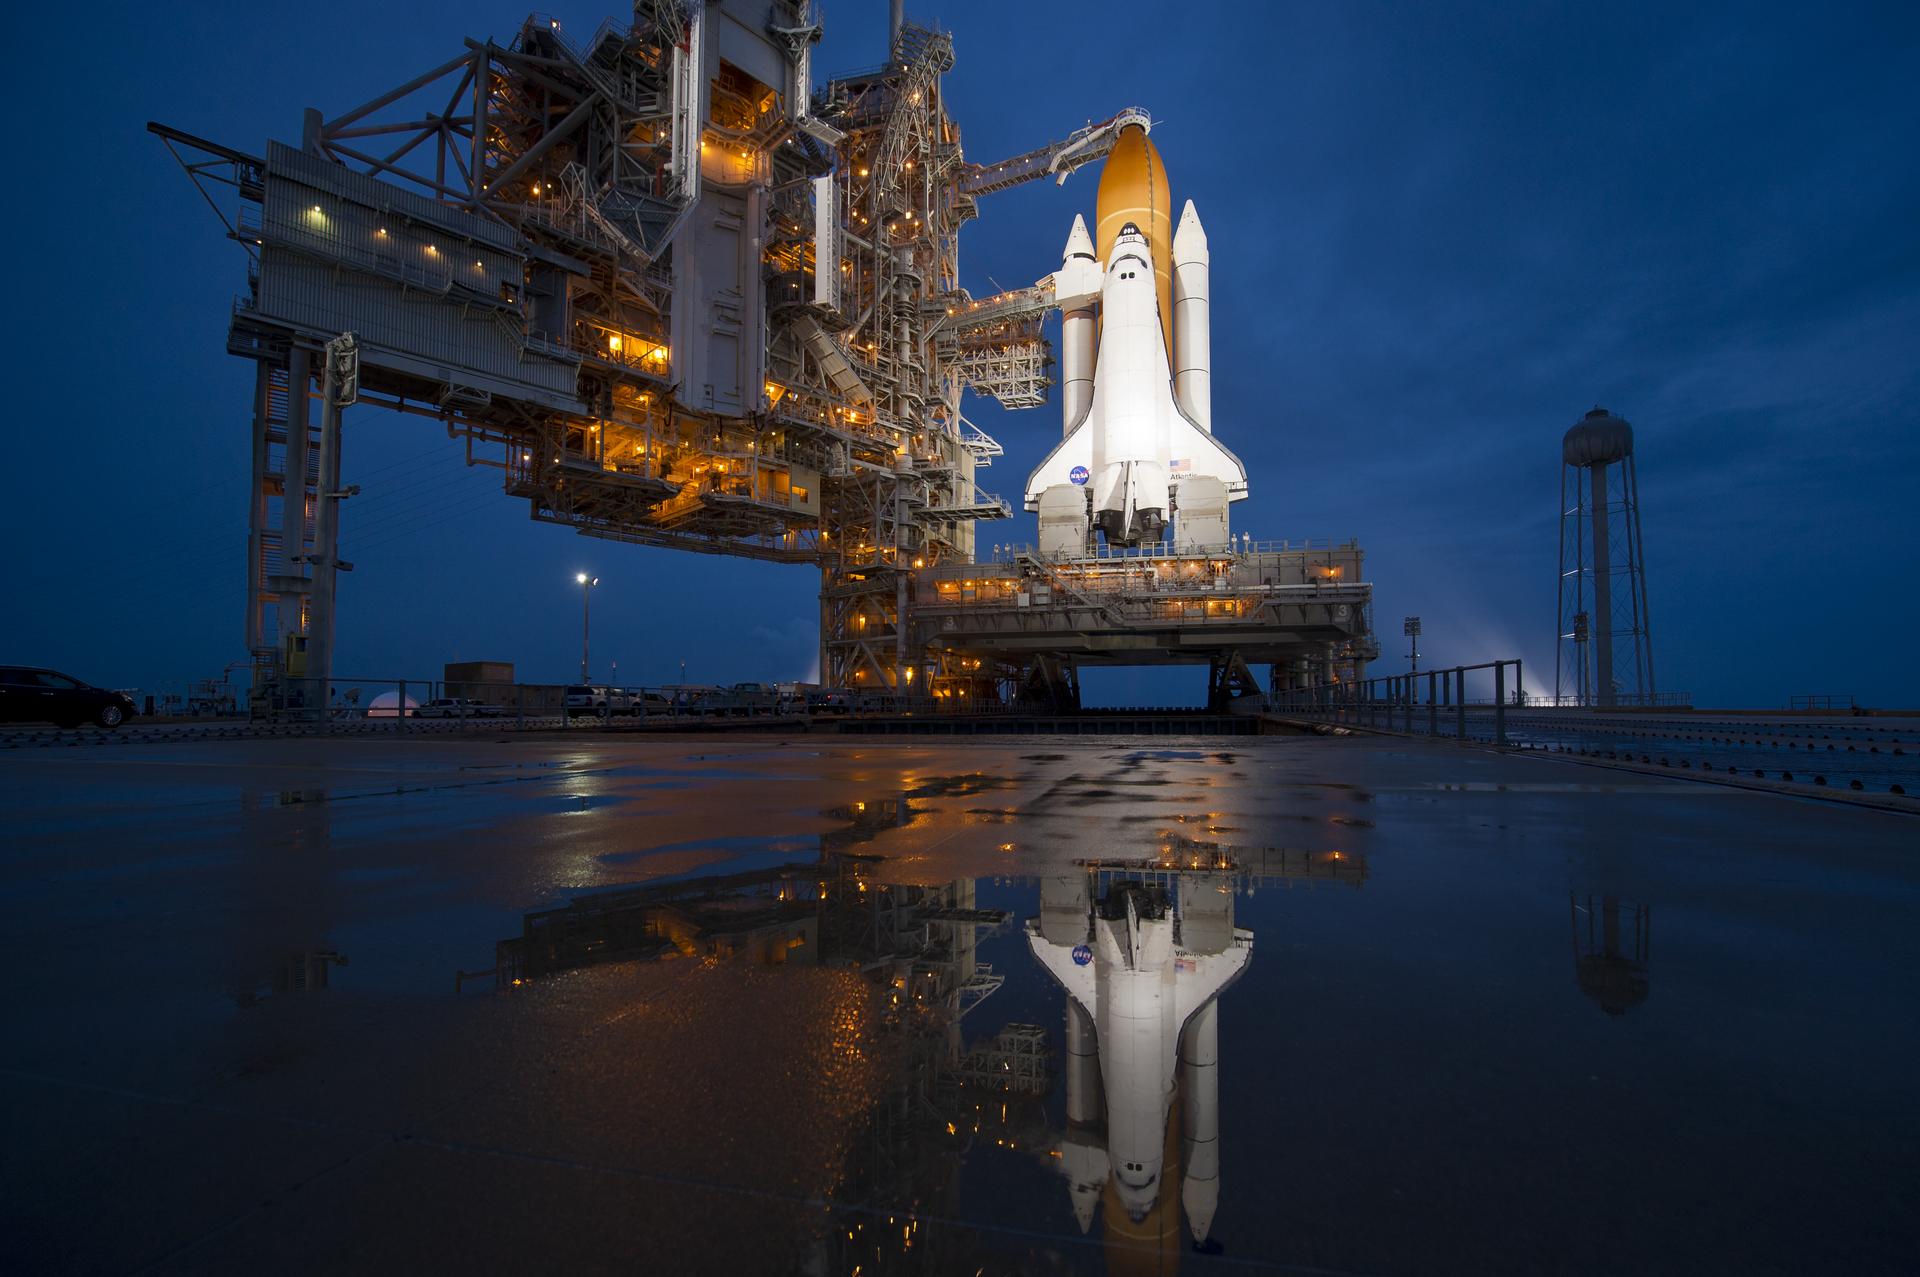 Photograph of a the space shuttle Atlantis before takeoff. NASA is an acronym that stands for National Aeronautics and Space Administration.